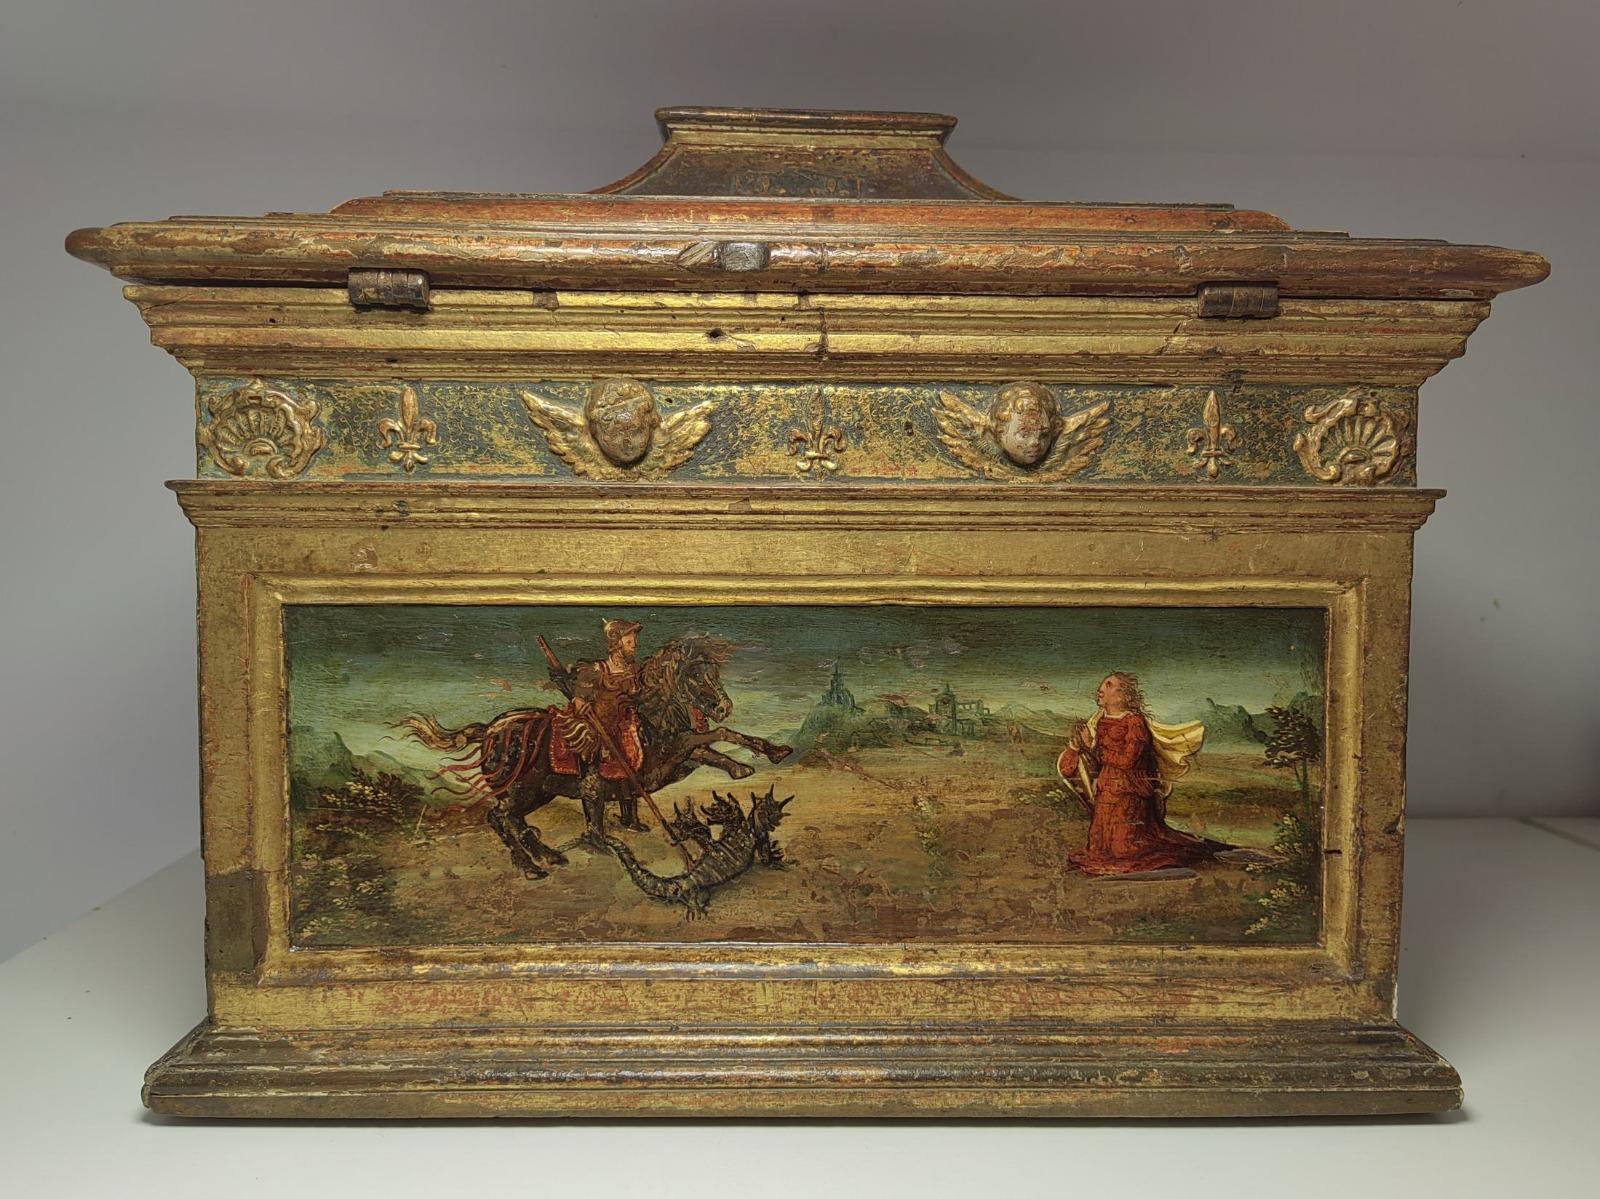 Important Renaissance Medical Box. Spanish Or Italian Workshop, Around 1550
Renaissance Medical Casket with stepped lid and vaulted flanked dome. Polychrome and gilded wood. Spanish or Italian workshop, circa 1550.

This chest shows the